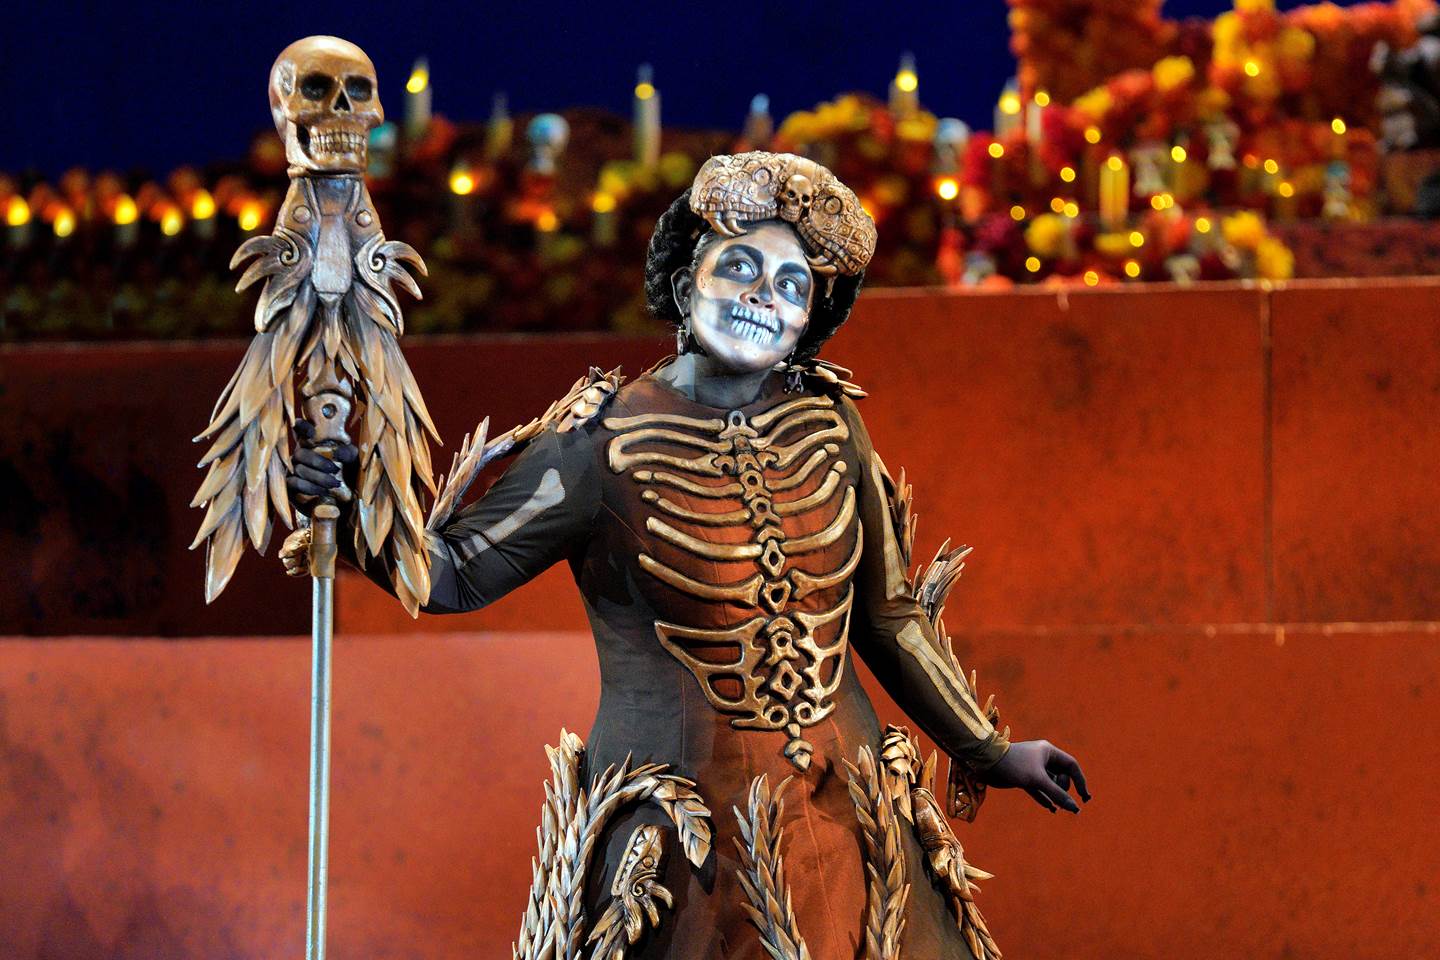 Scene from Frida of person dressed as a skeleton holding a scythe.